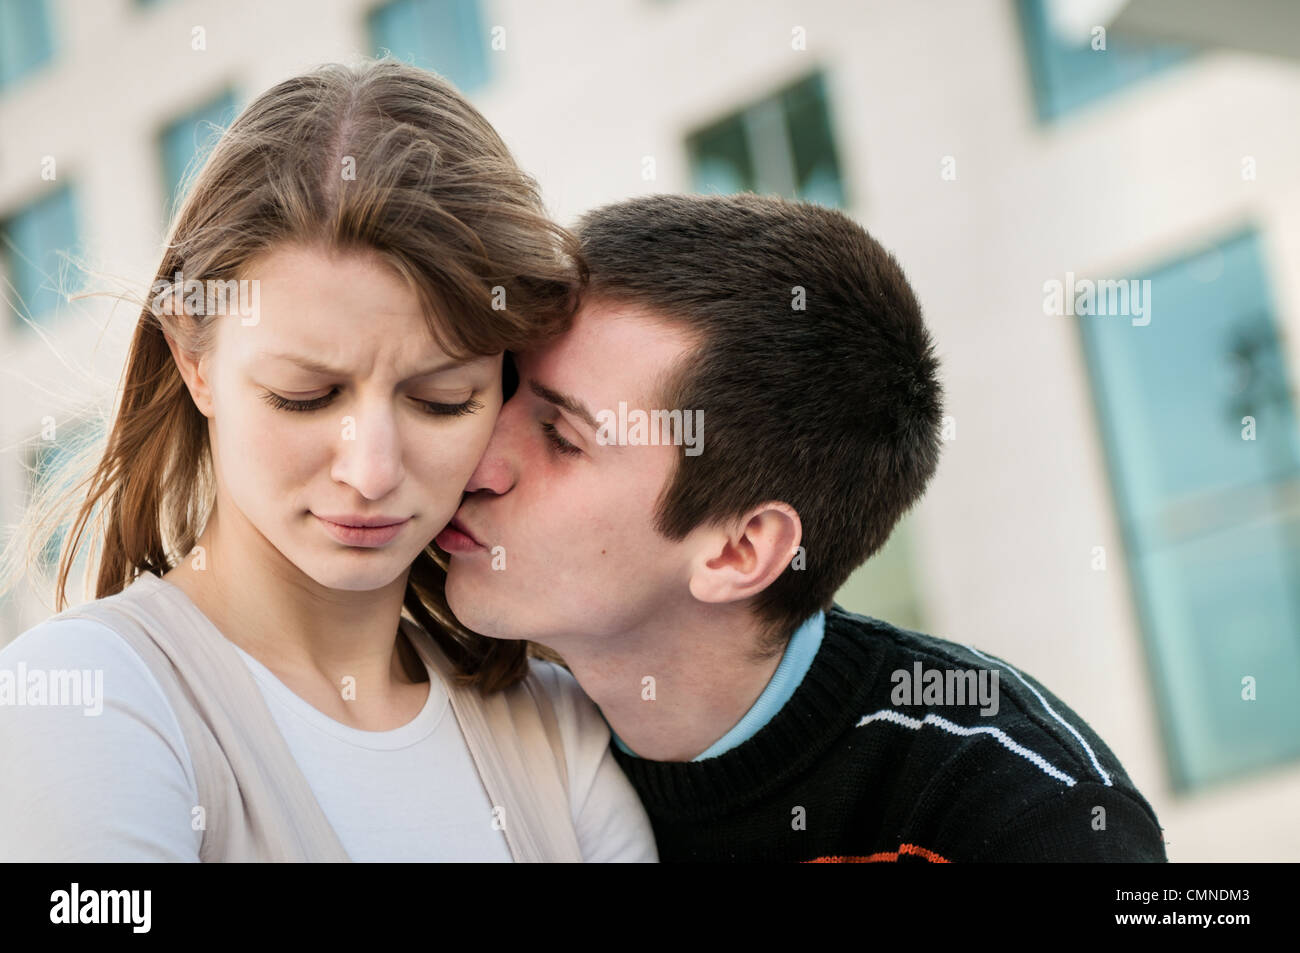 Relationship problems - man trying to reconcile with offended woman Stock Photo